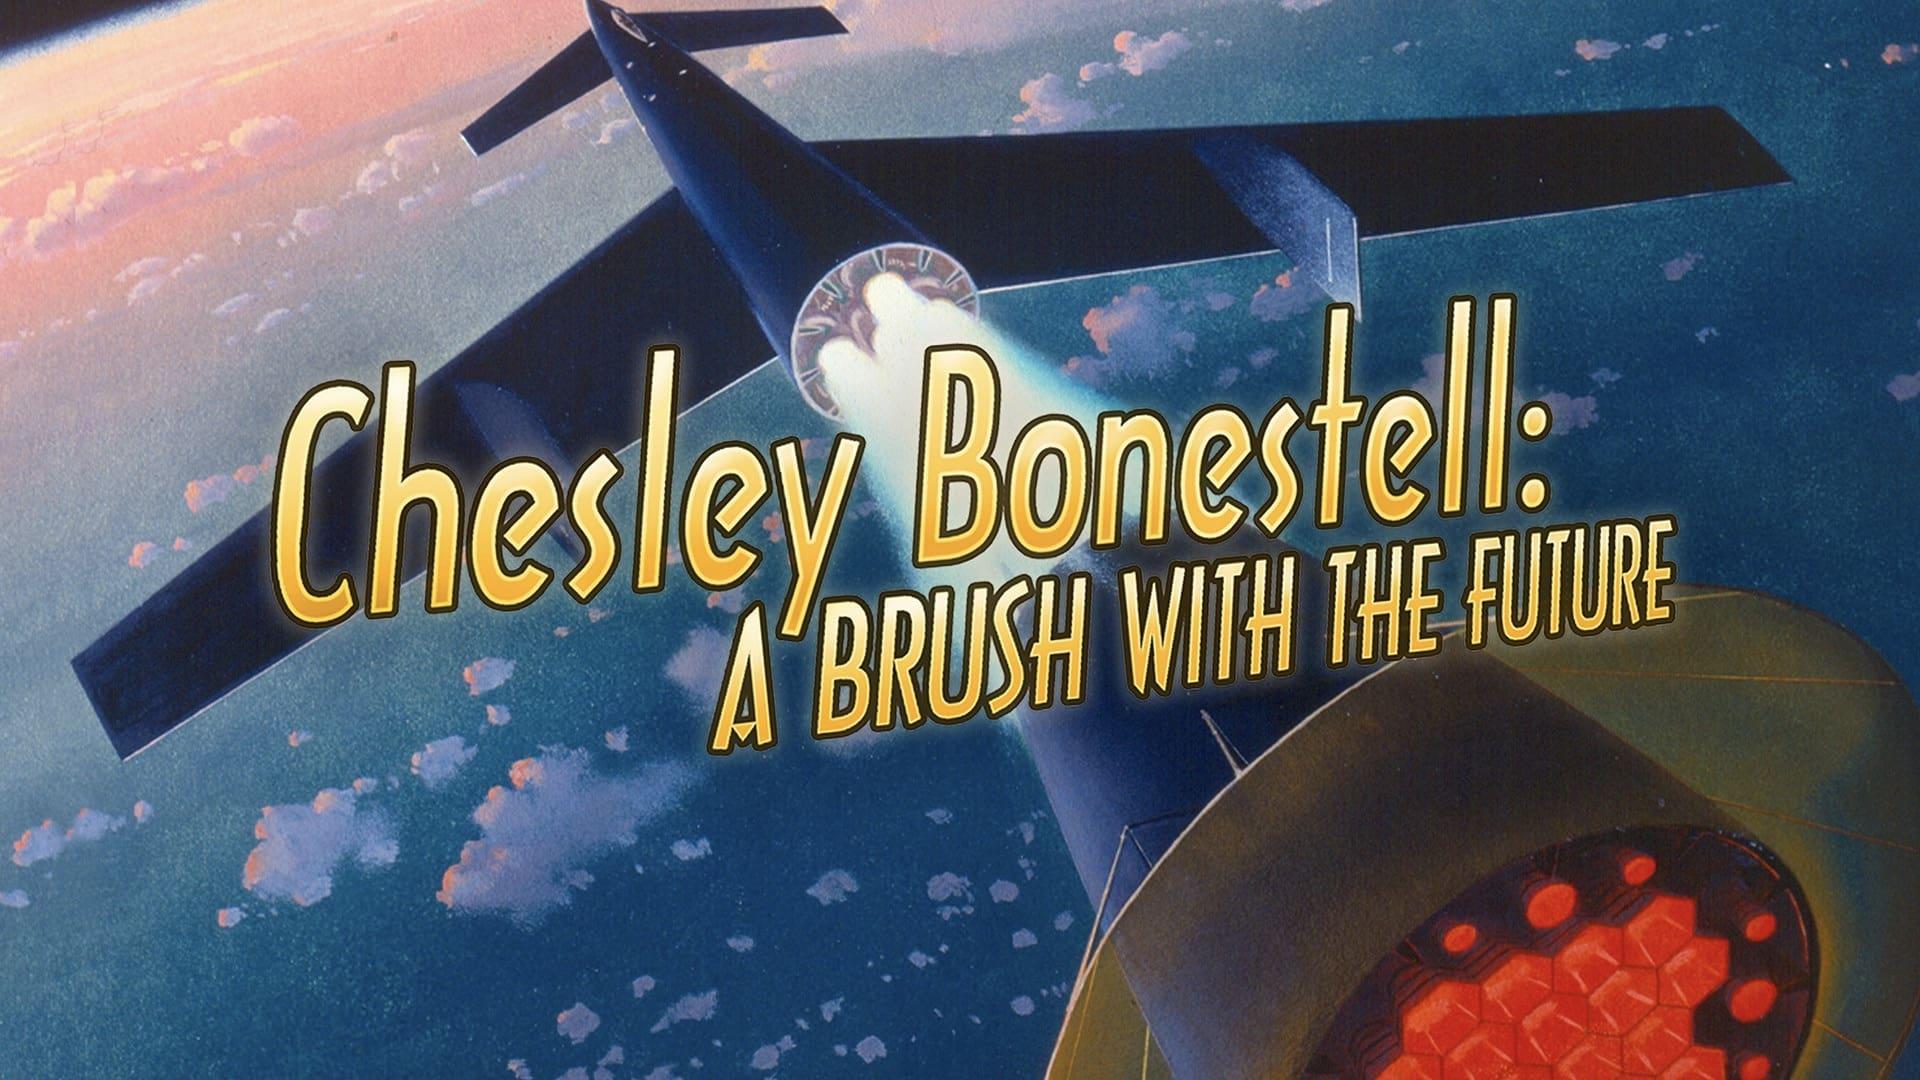 Chesley Bonestell: A Brush with the Future backdrop